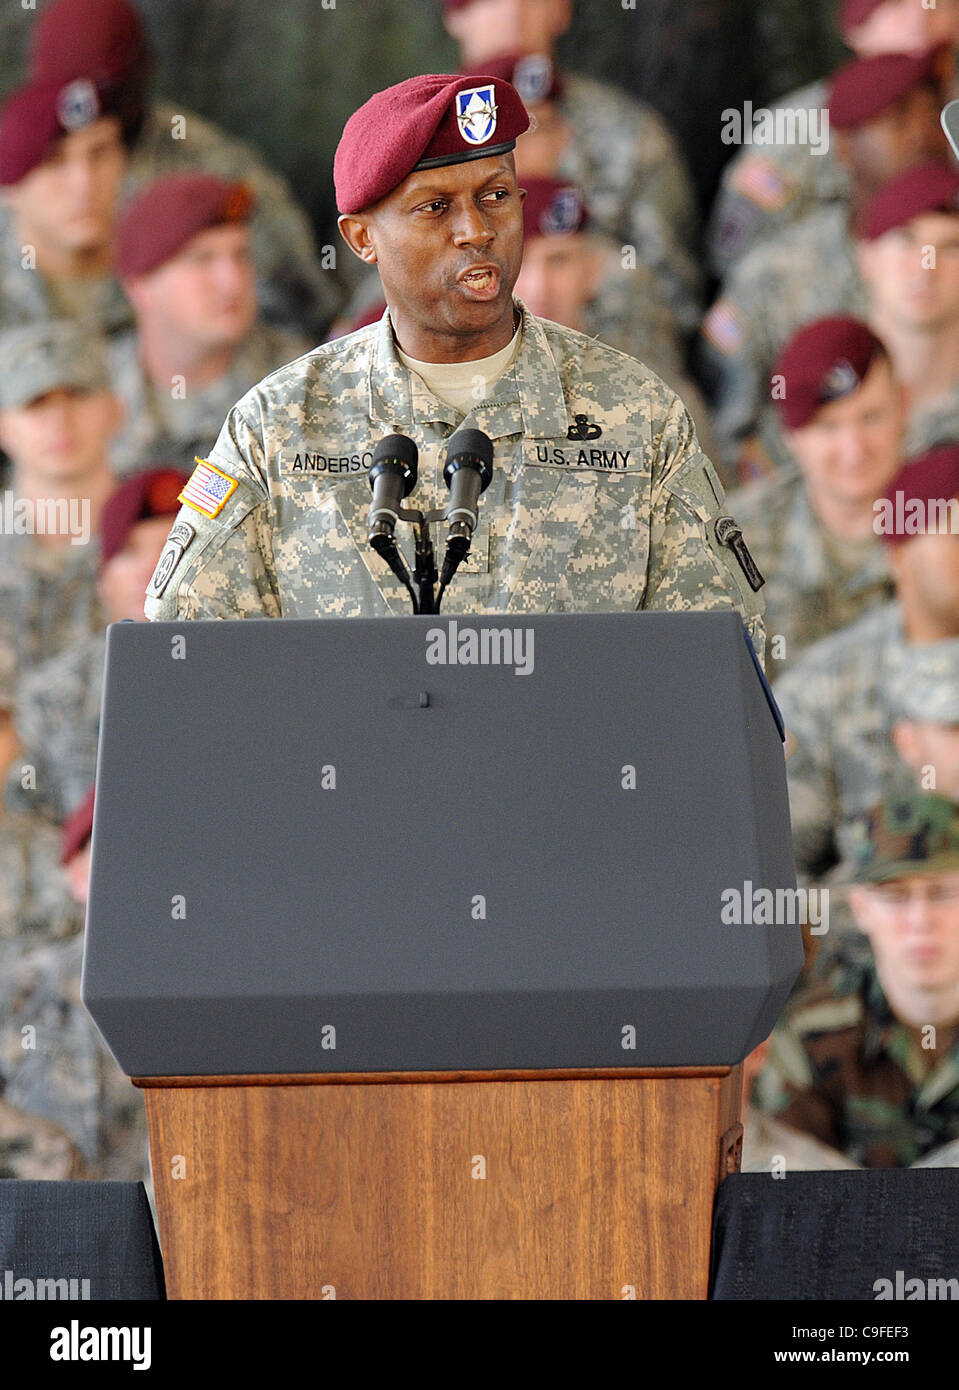 Dec. 14, 2011 - Fort Bragg, North Carolina; USA - Major General RODNEY ANDERSON introduces  President BARACK OBAMA has he speaks to a capacity audience at Fort Bragg Military Base as he addressed the audience on the completion on the war in Iraq. President Obama and First Lady Michelle Obama thanked Stock Photo